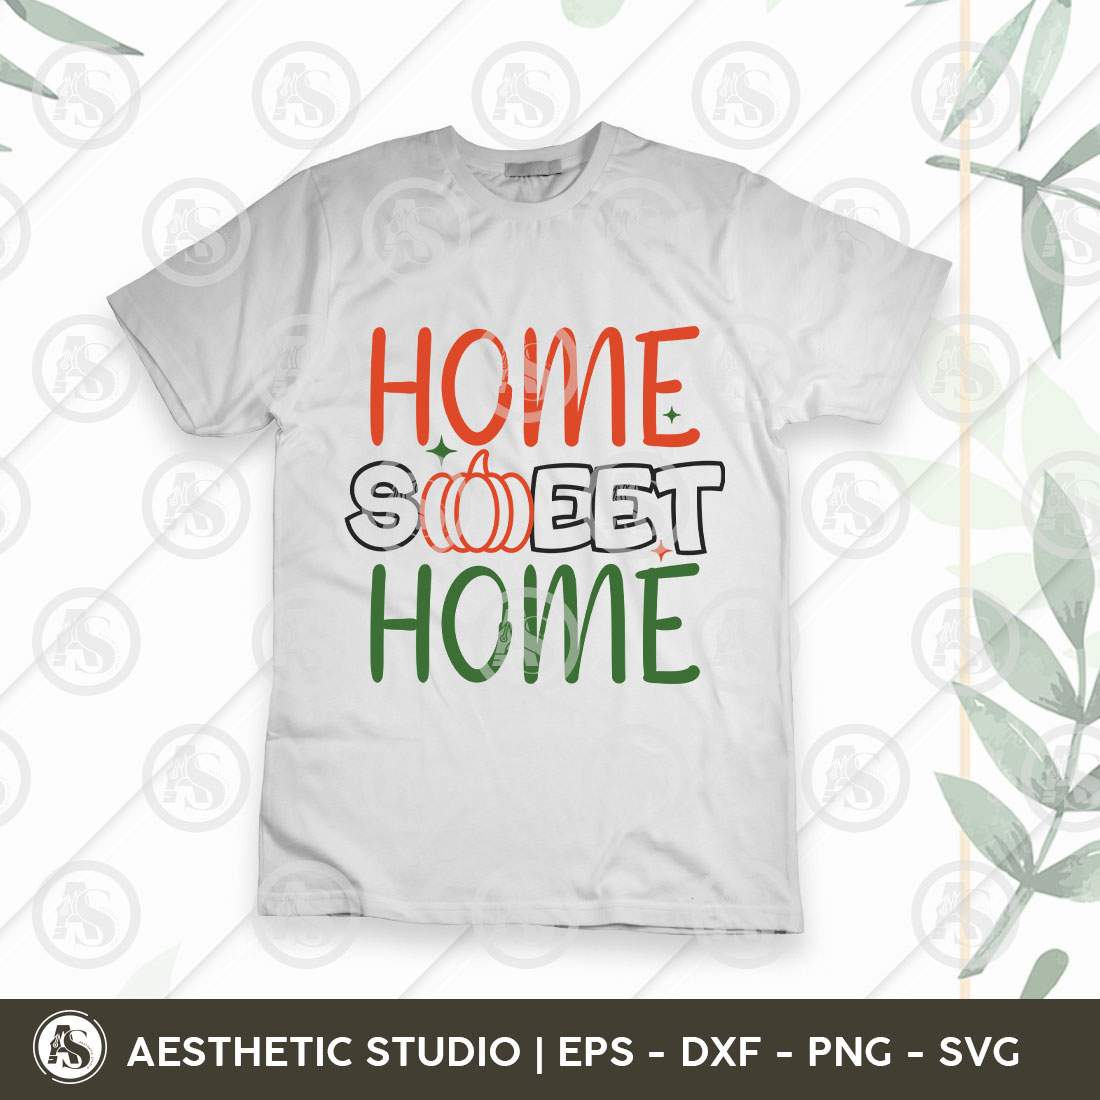 Home Sweet Home Svg, Thanksgiving Svg, Thanksgiving Quote, Cut Files for Cricut, Thankful Svg, Pumpkin svg, T-shirt Design, Gobble Svg, Pumpkin Spice, Fall Leaves Svg, Fall Vibes Svg, preview image.